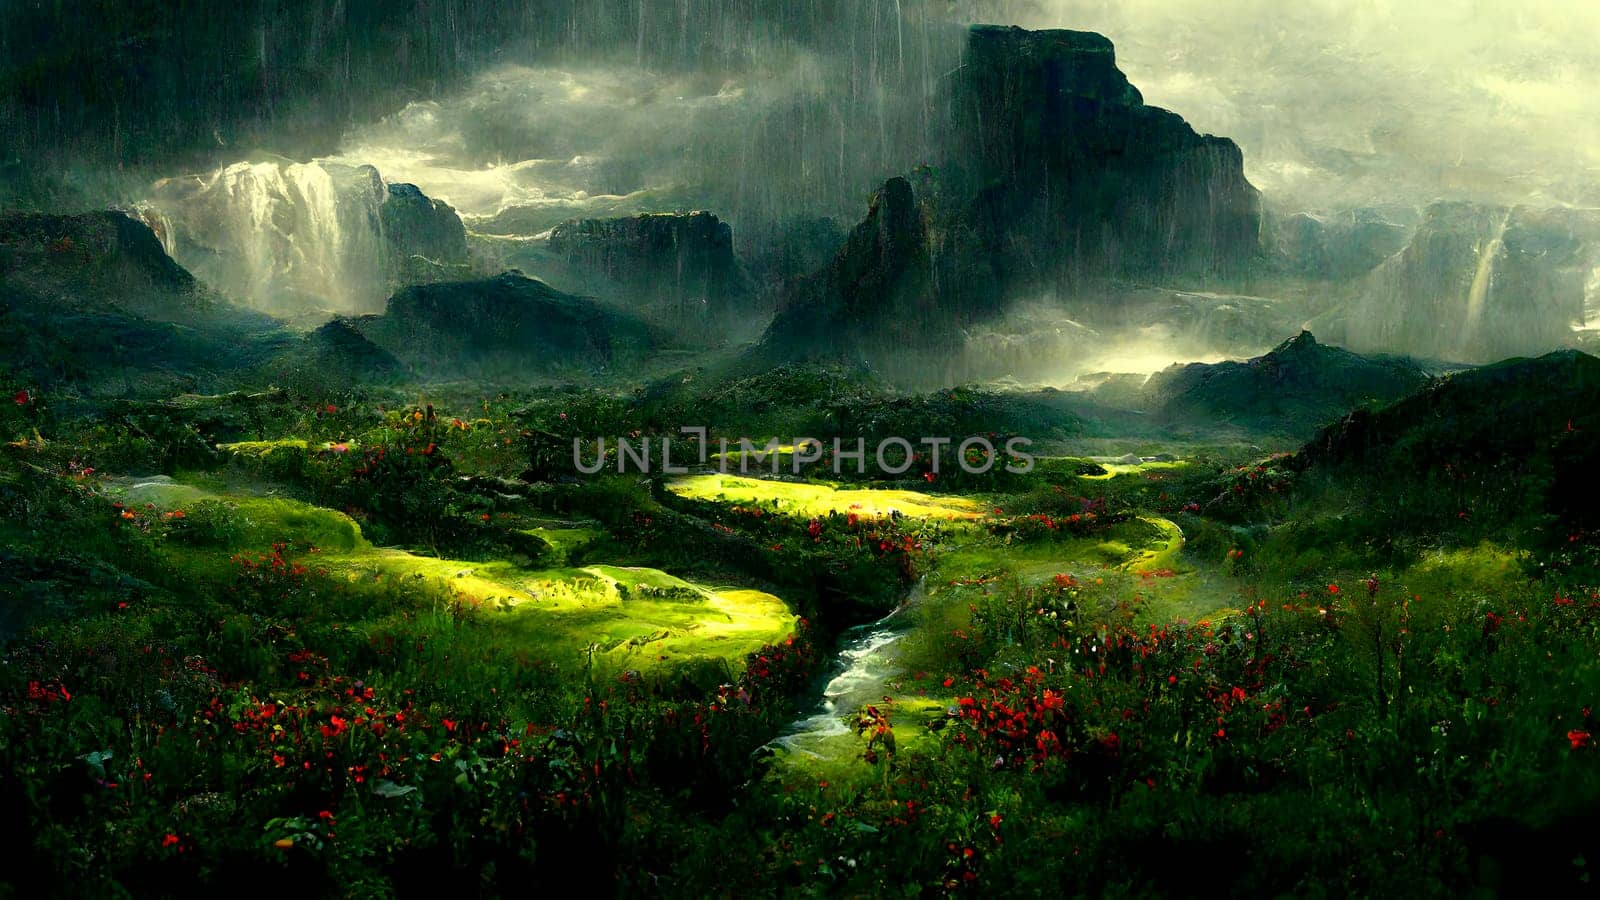 rainy fantasy landscape during summer day storm, neural network generated art. Digitally generated image. Not based on any actual scene or pattern.